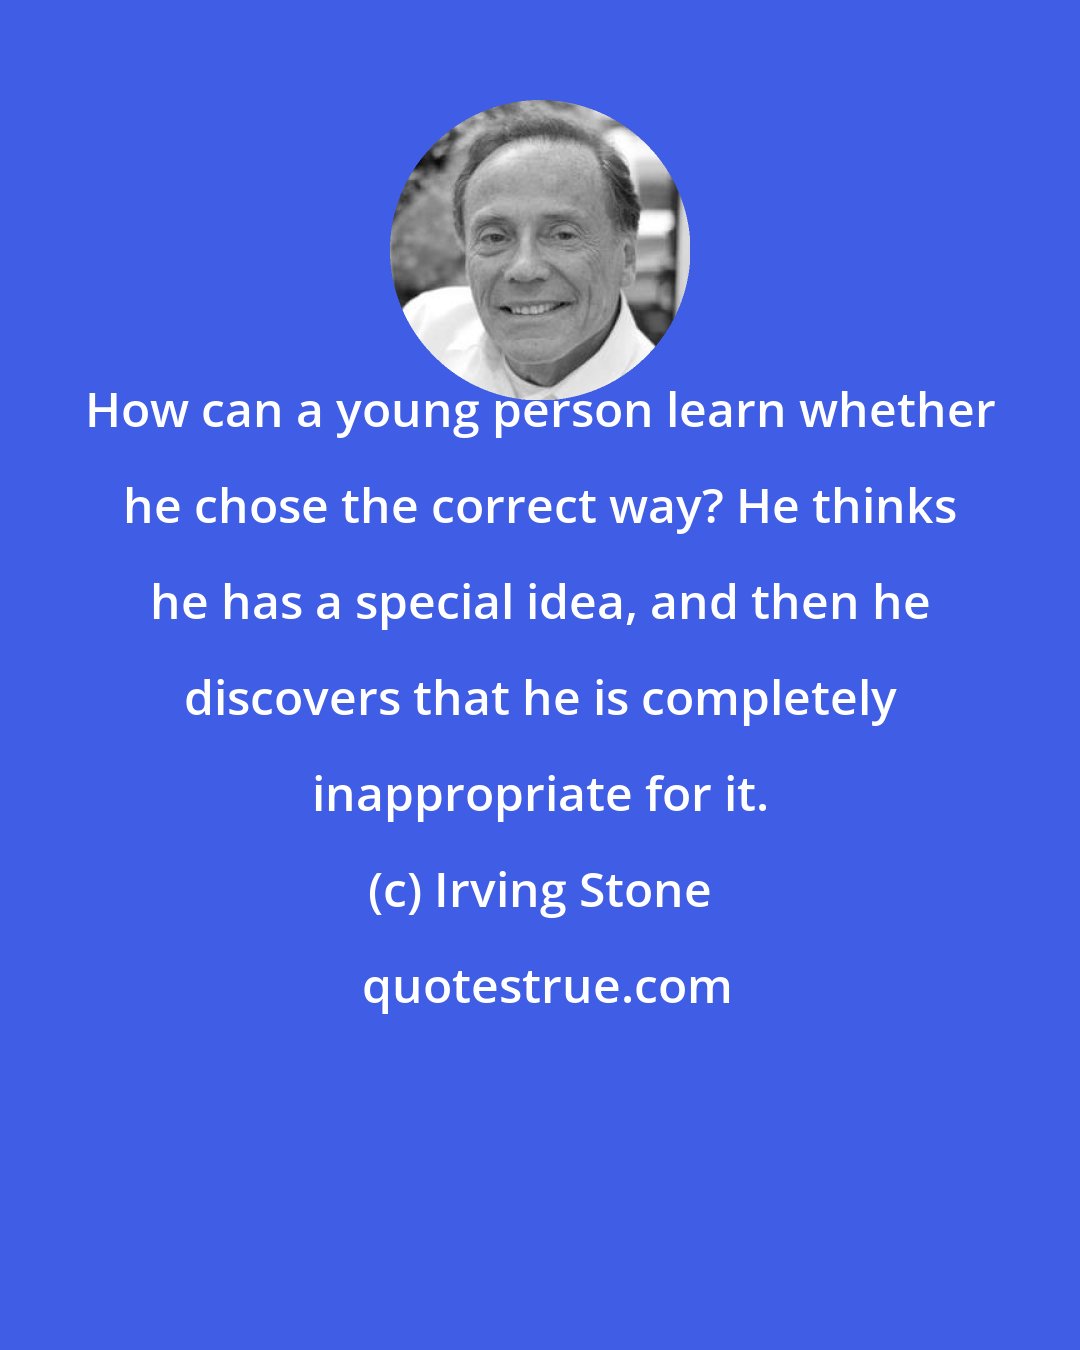 Irving Stone: How can a young person learn whether he chose the correct way? He thinks he has a special idea, and then he discovers that he is completely inappropriate for it.